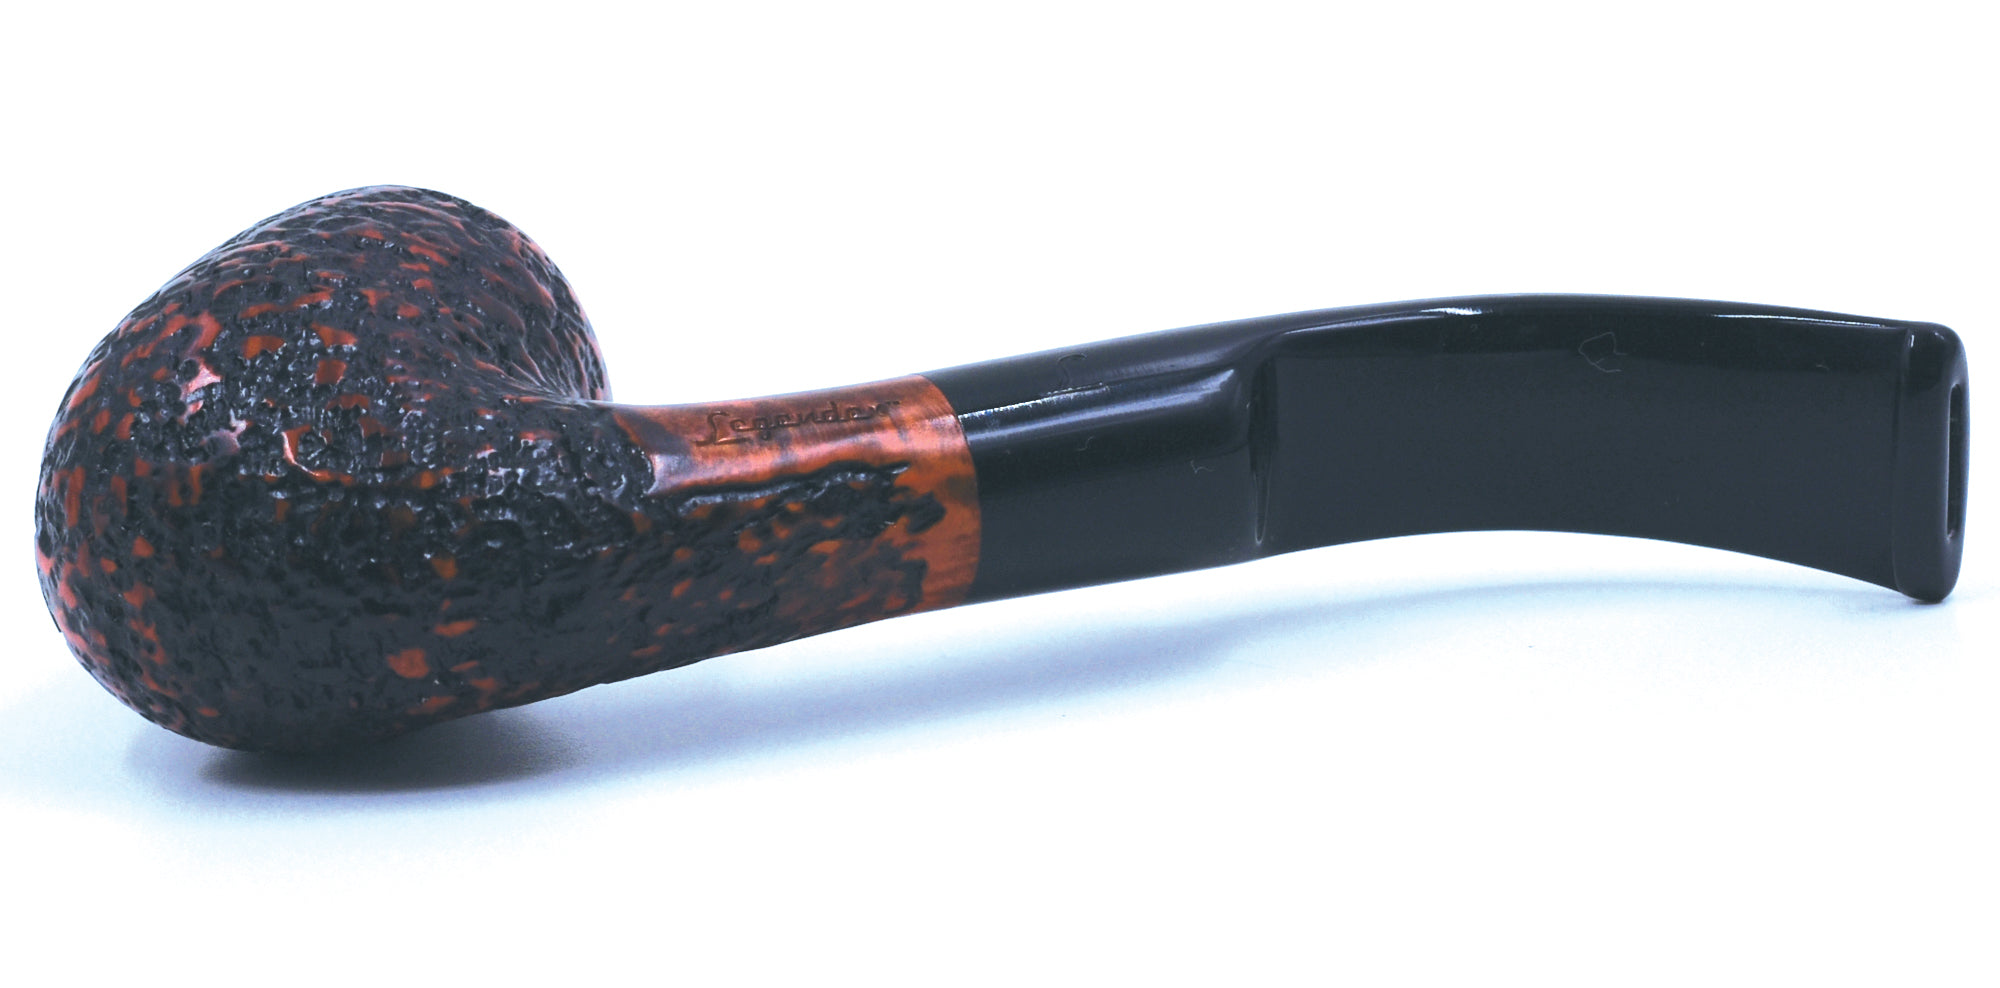 LEGENDEX® SCALADI* 9 MM Filtered Briar Smoking Pipe Made In Italy 01-08-107